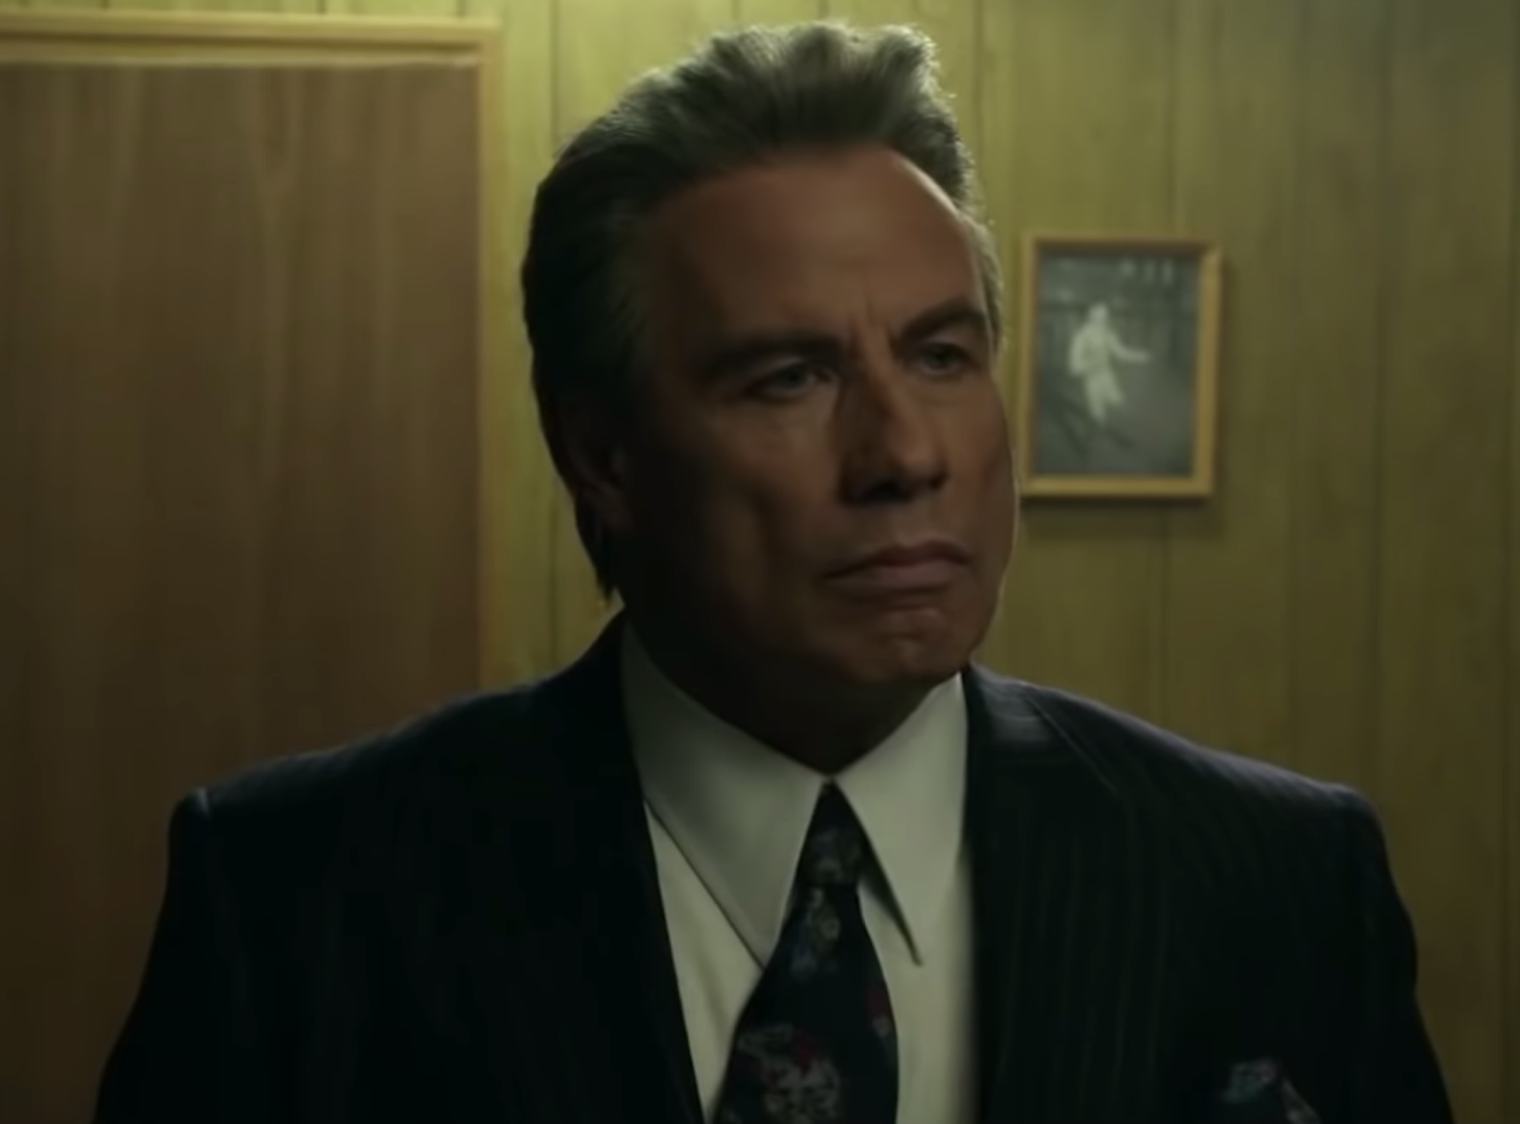 Photos Of The 'Gotti' Cast Compared To The Real People Are Truly Striking